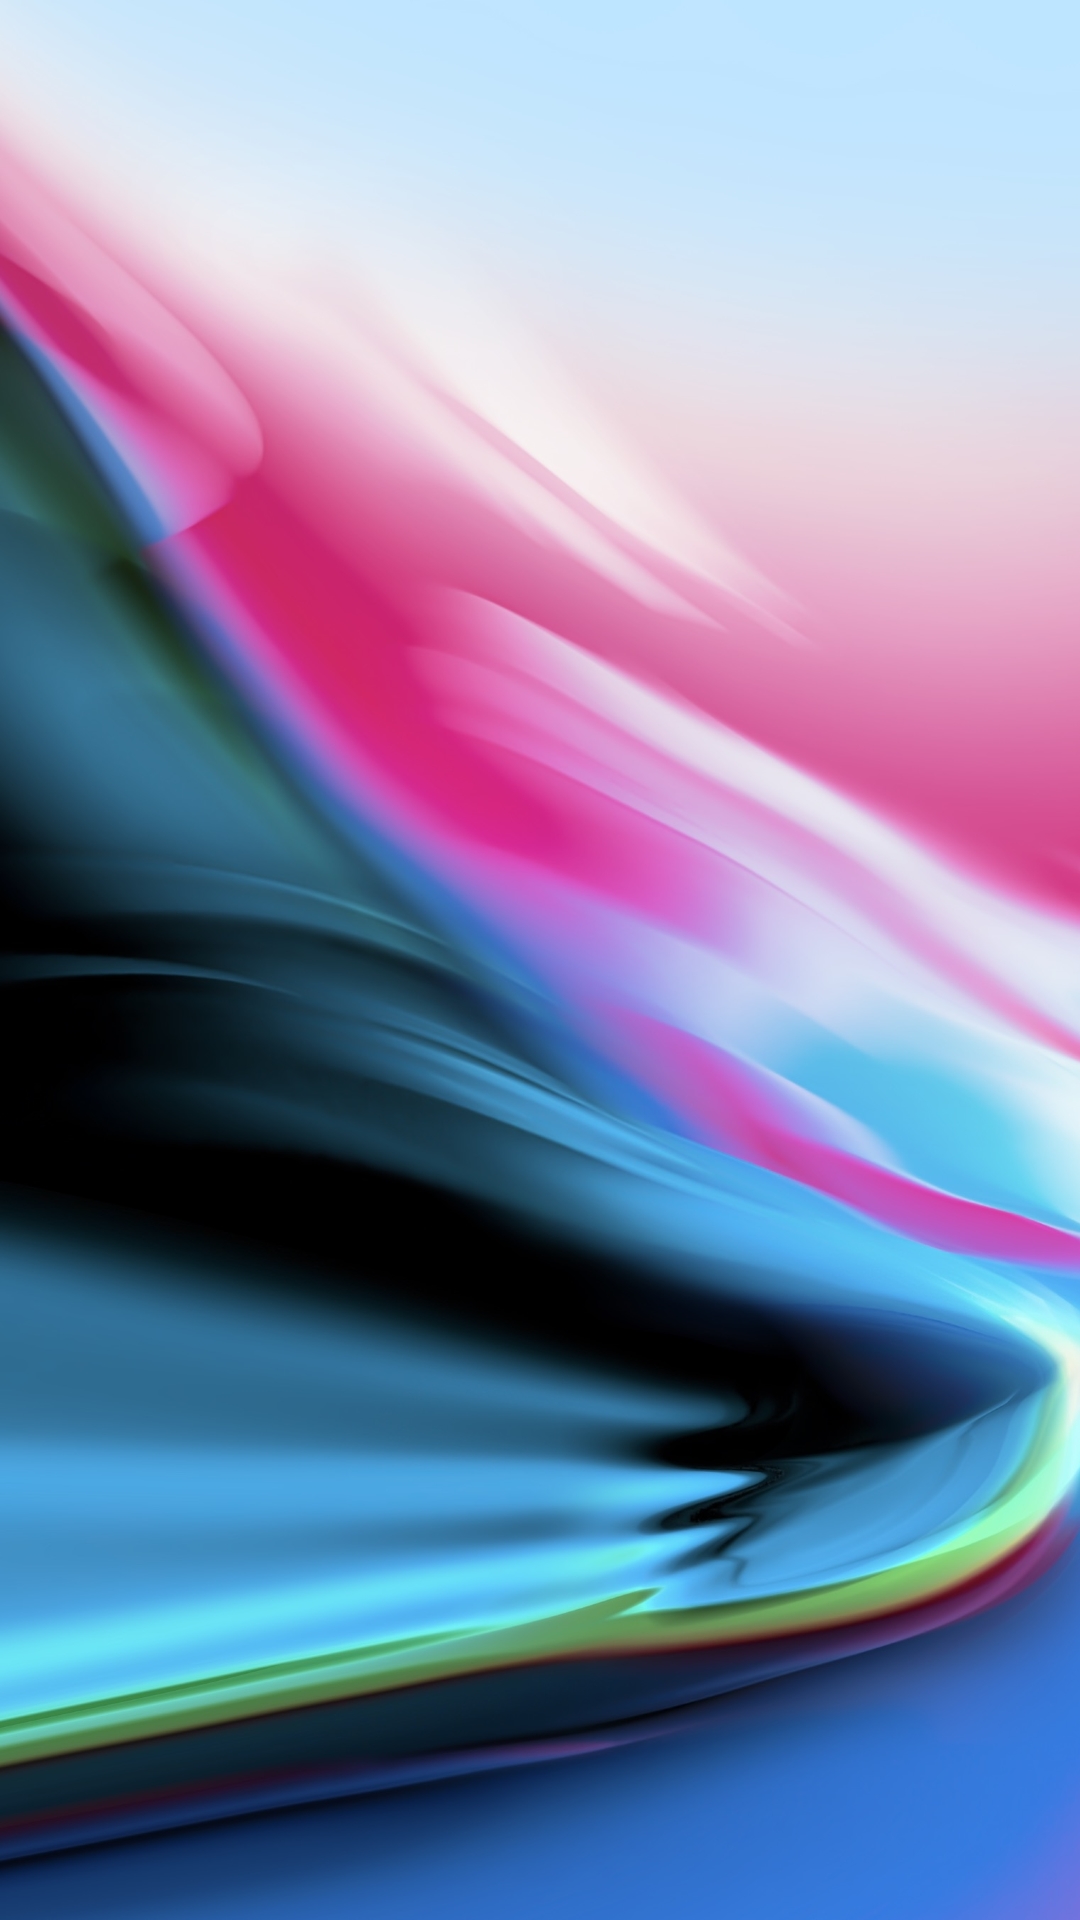 ios hd wallpapers 1080p,pink,blue,line,close up,graphic design